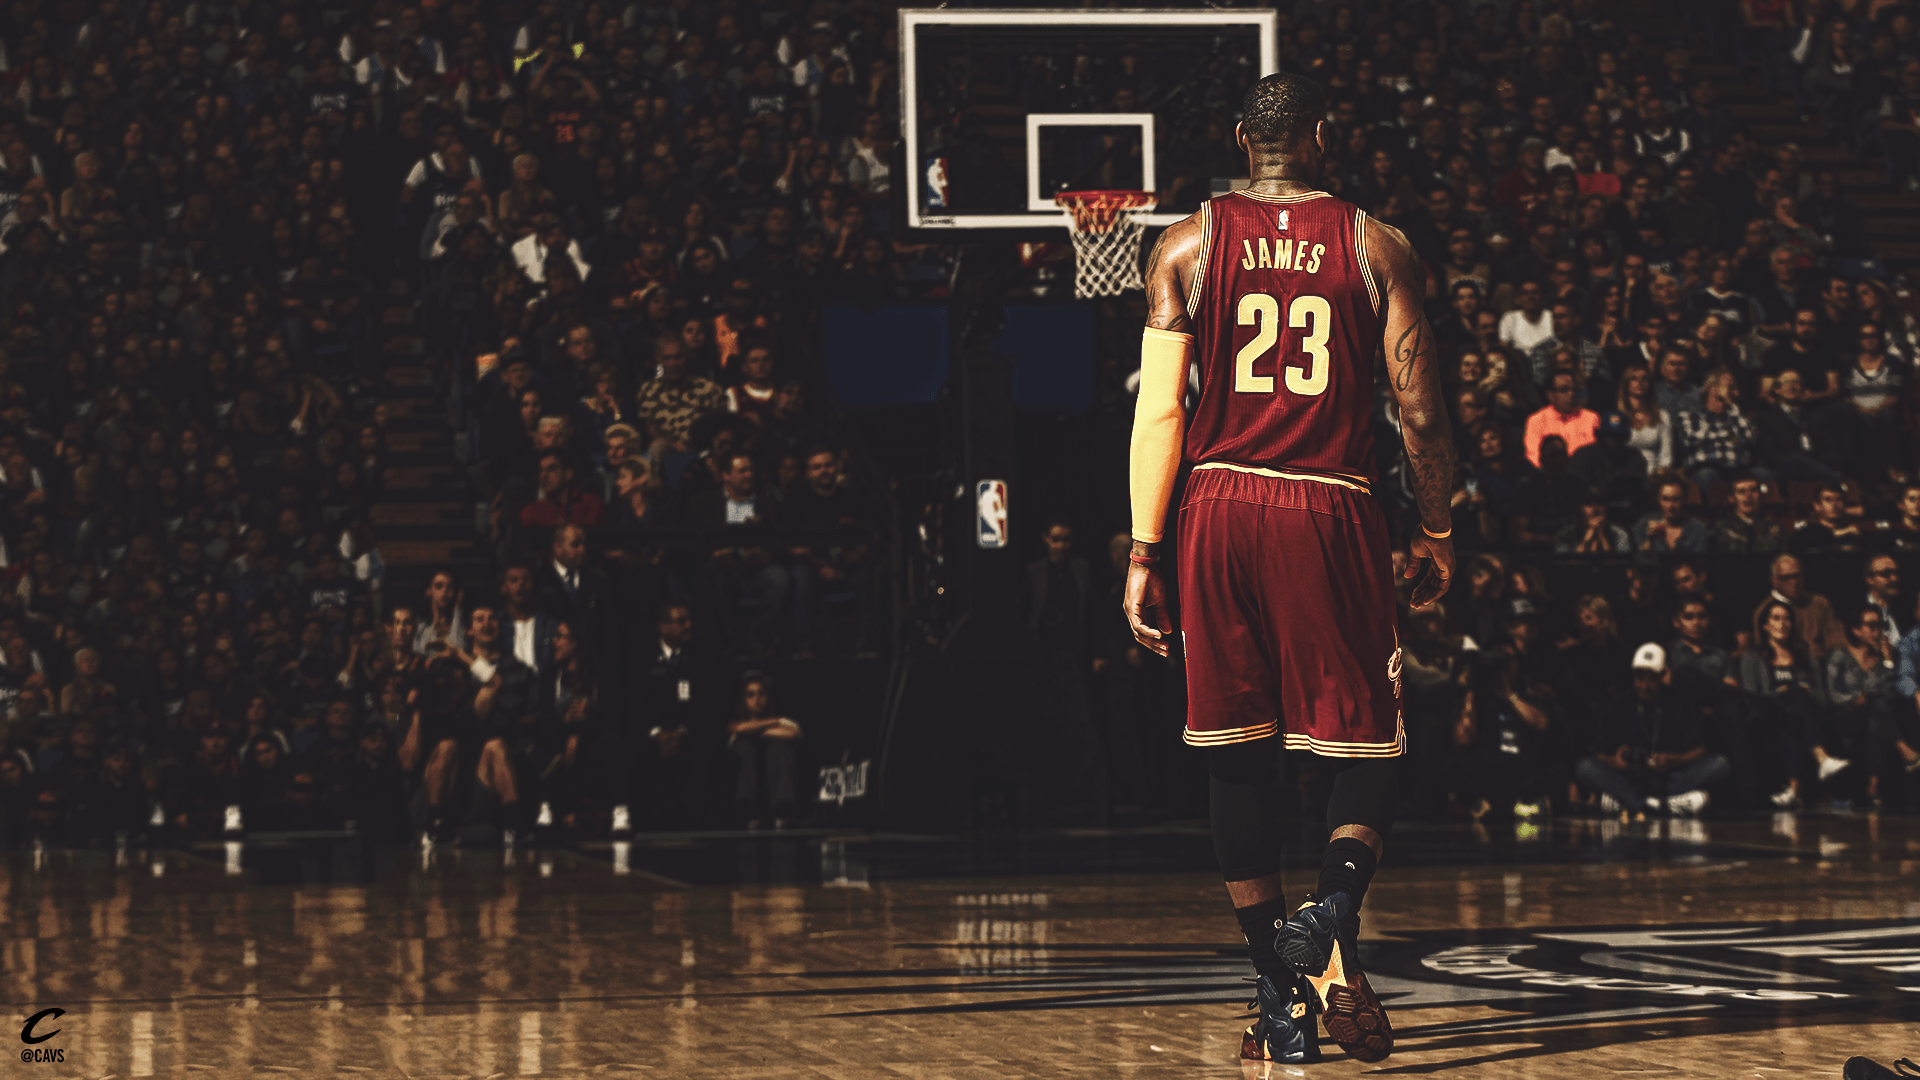 Wallpaper Cleveland Cavaliers And Lebron Wallpaper